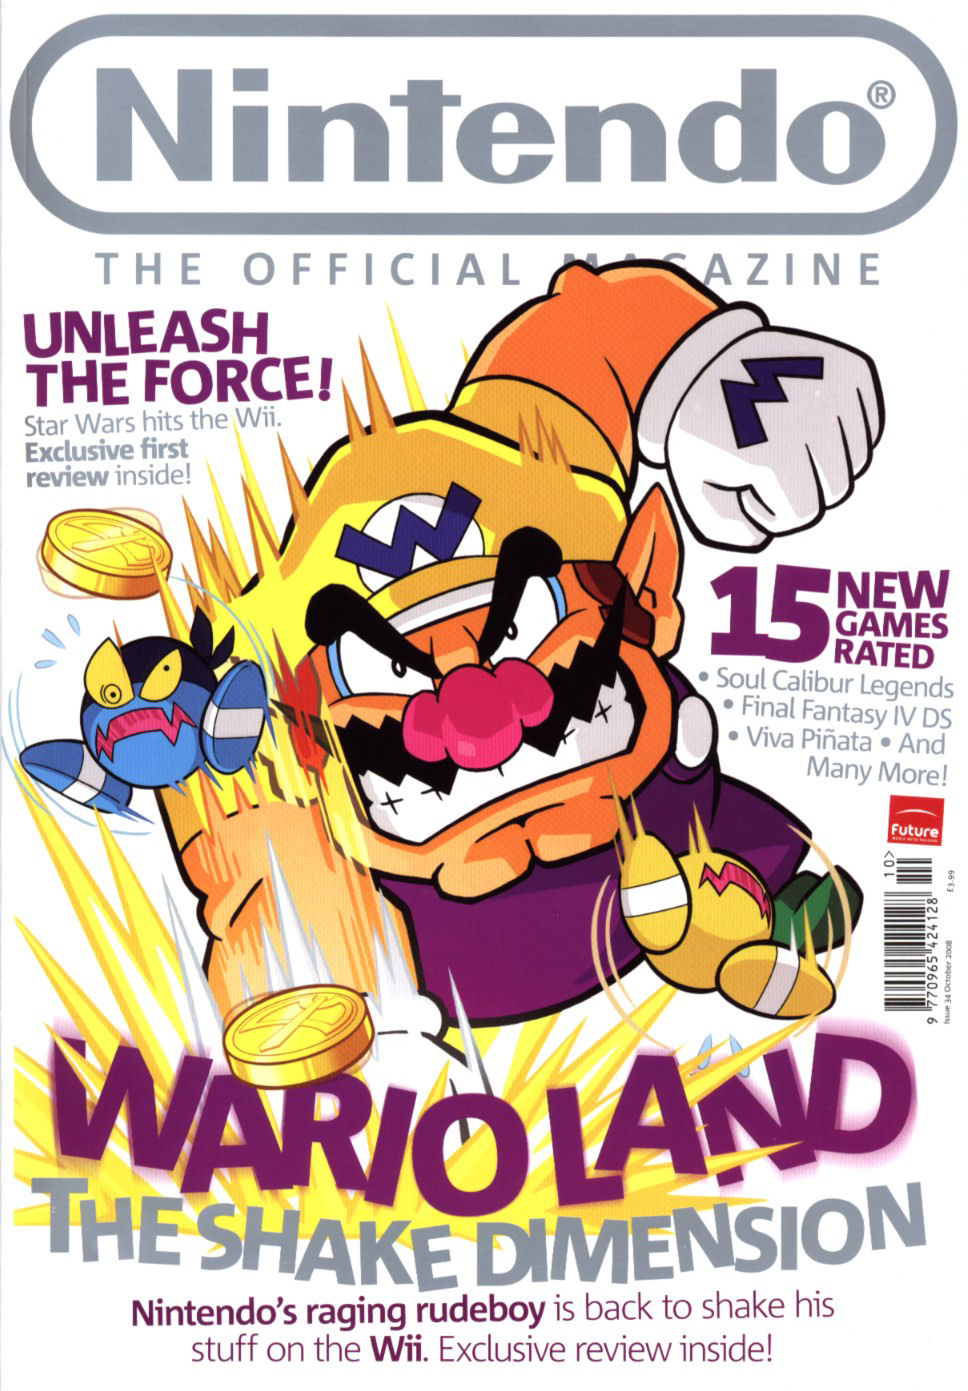 Image Official Nintendo Magazine Issue 34.jpg Magazines from the